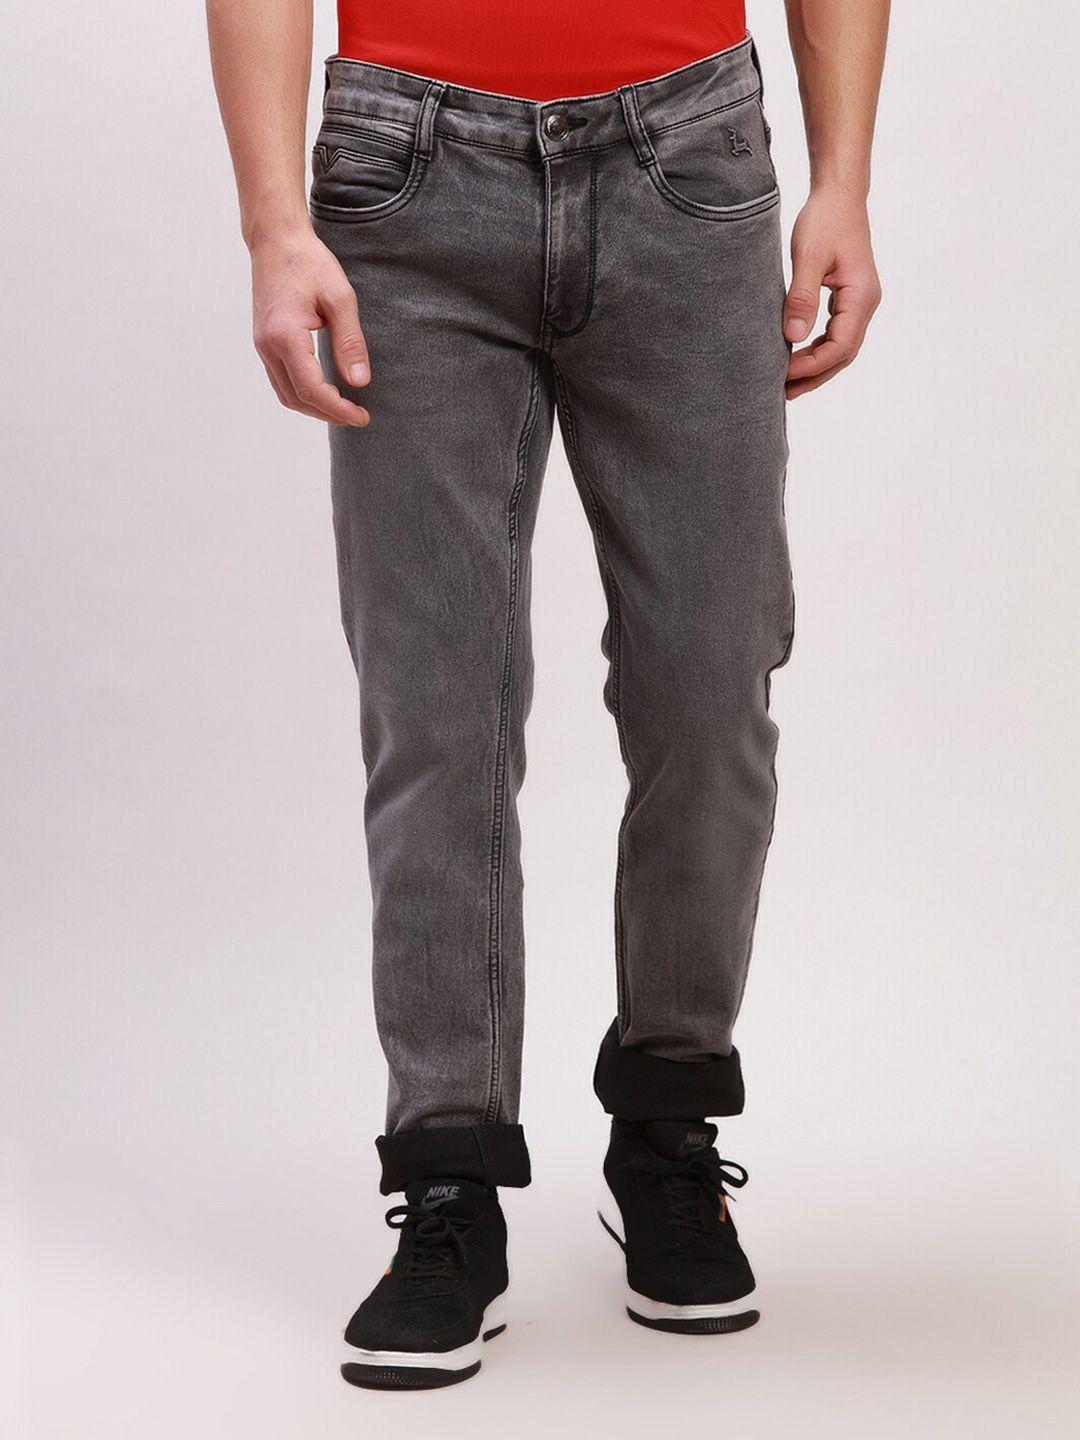 parx-men-tapered-fit-low-rise-low-distress-heavy-fade-cotton-jeans